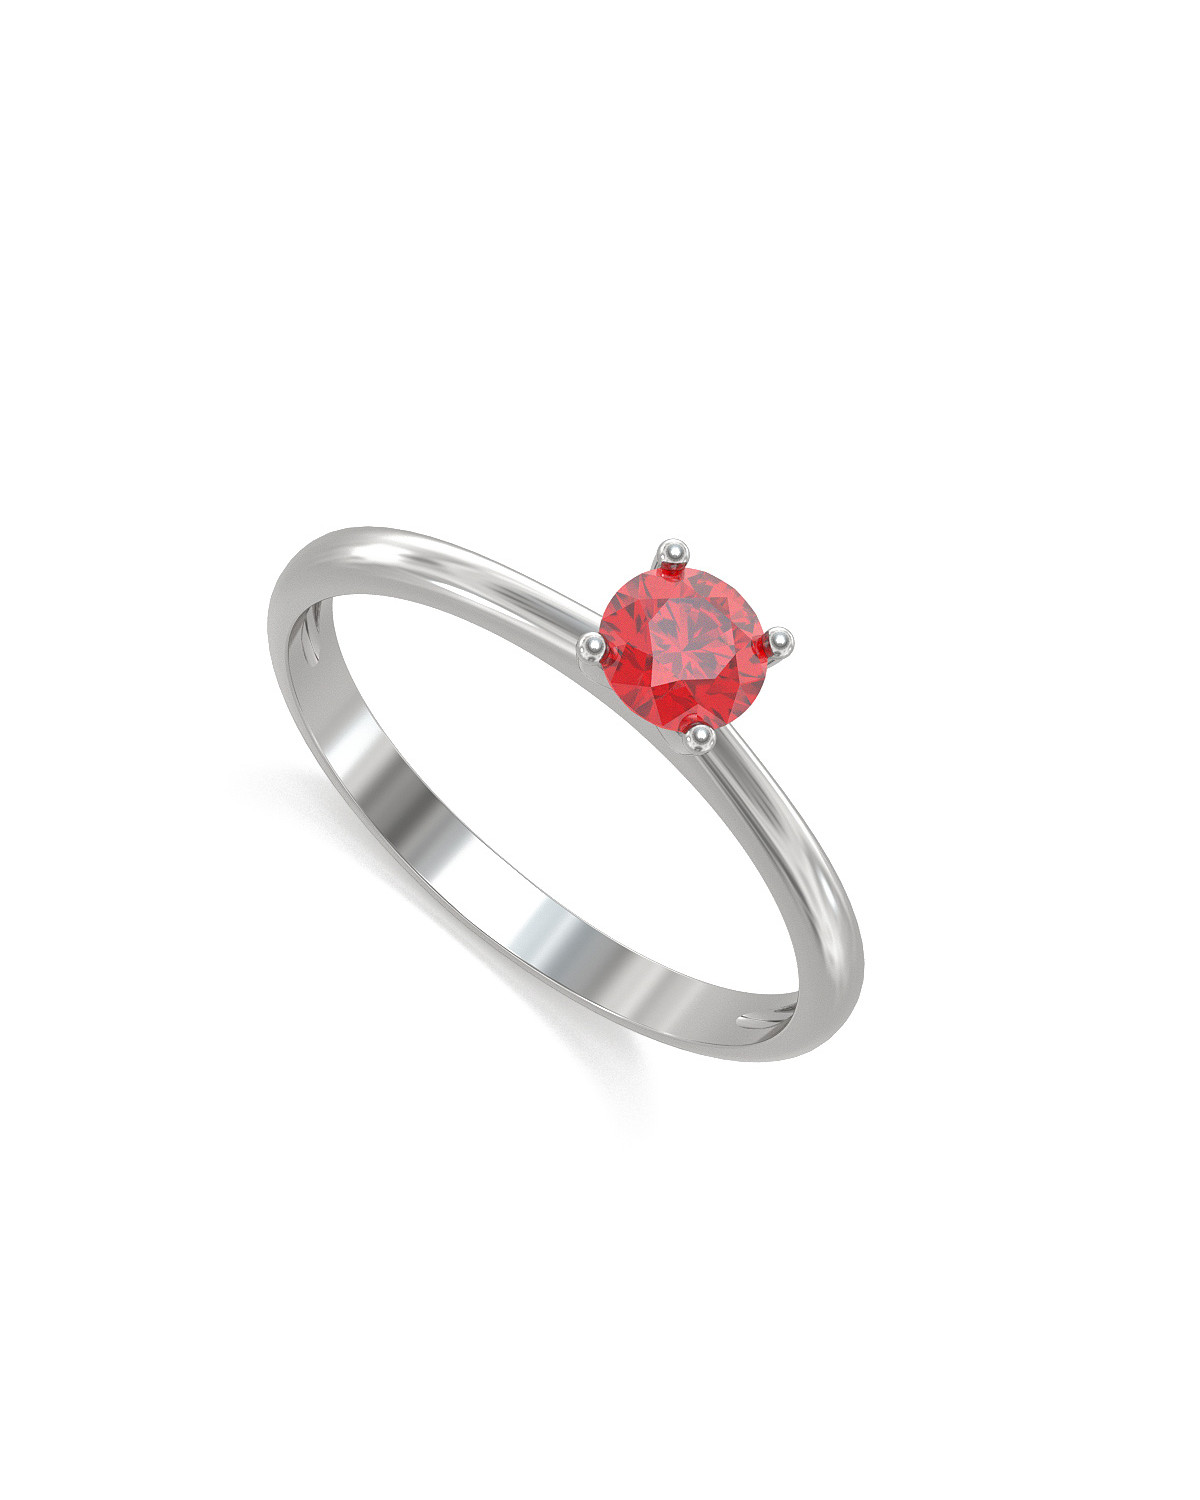 Bague Solitaire Or Blanc Rubis 1.59grs